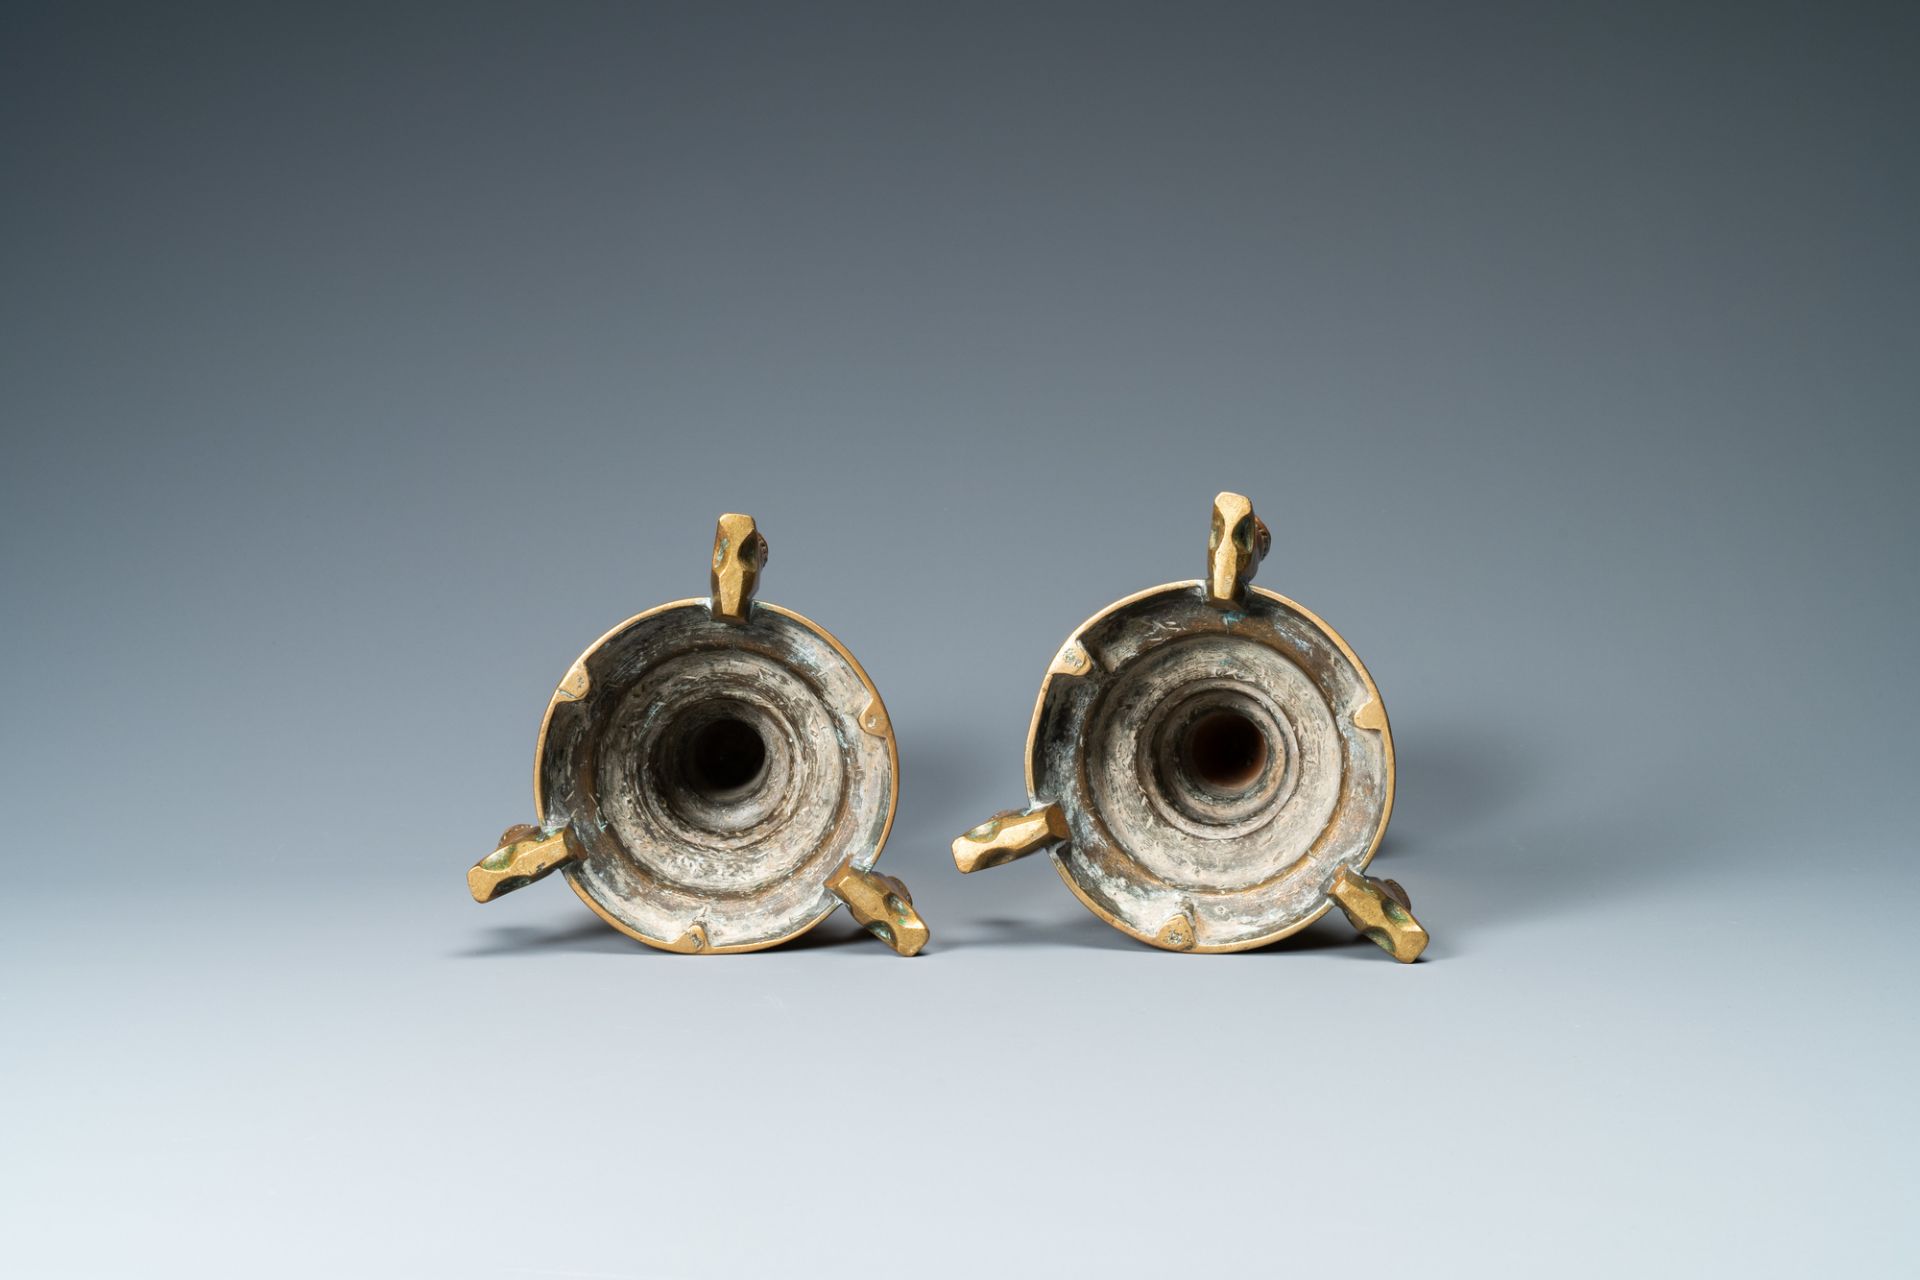 A pair of brass alloy candlesticks on lion feet, The Netherlands, 1st half 15th C. - Image 6 of 6